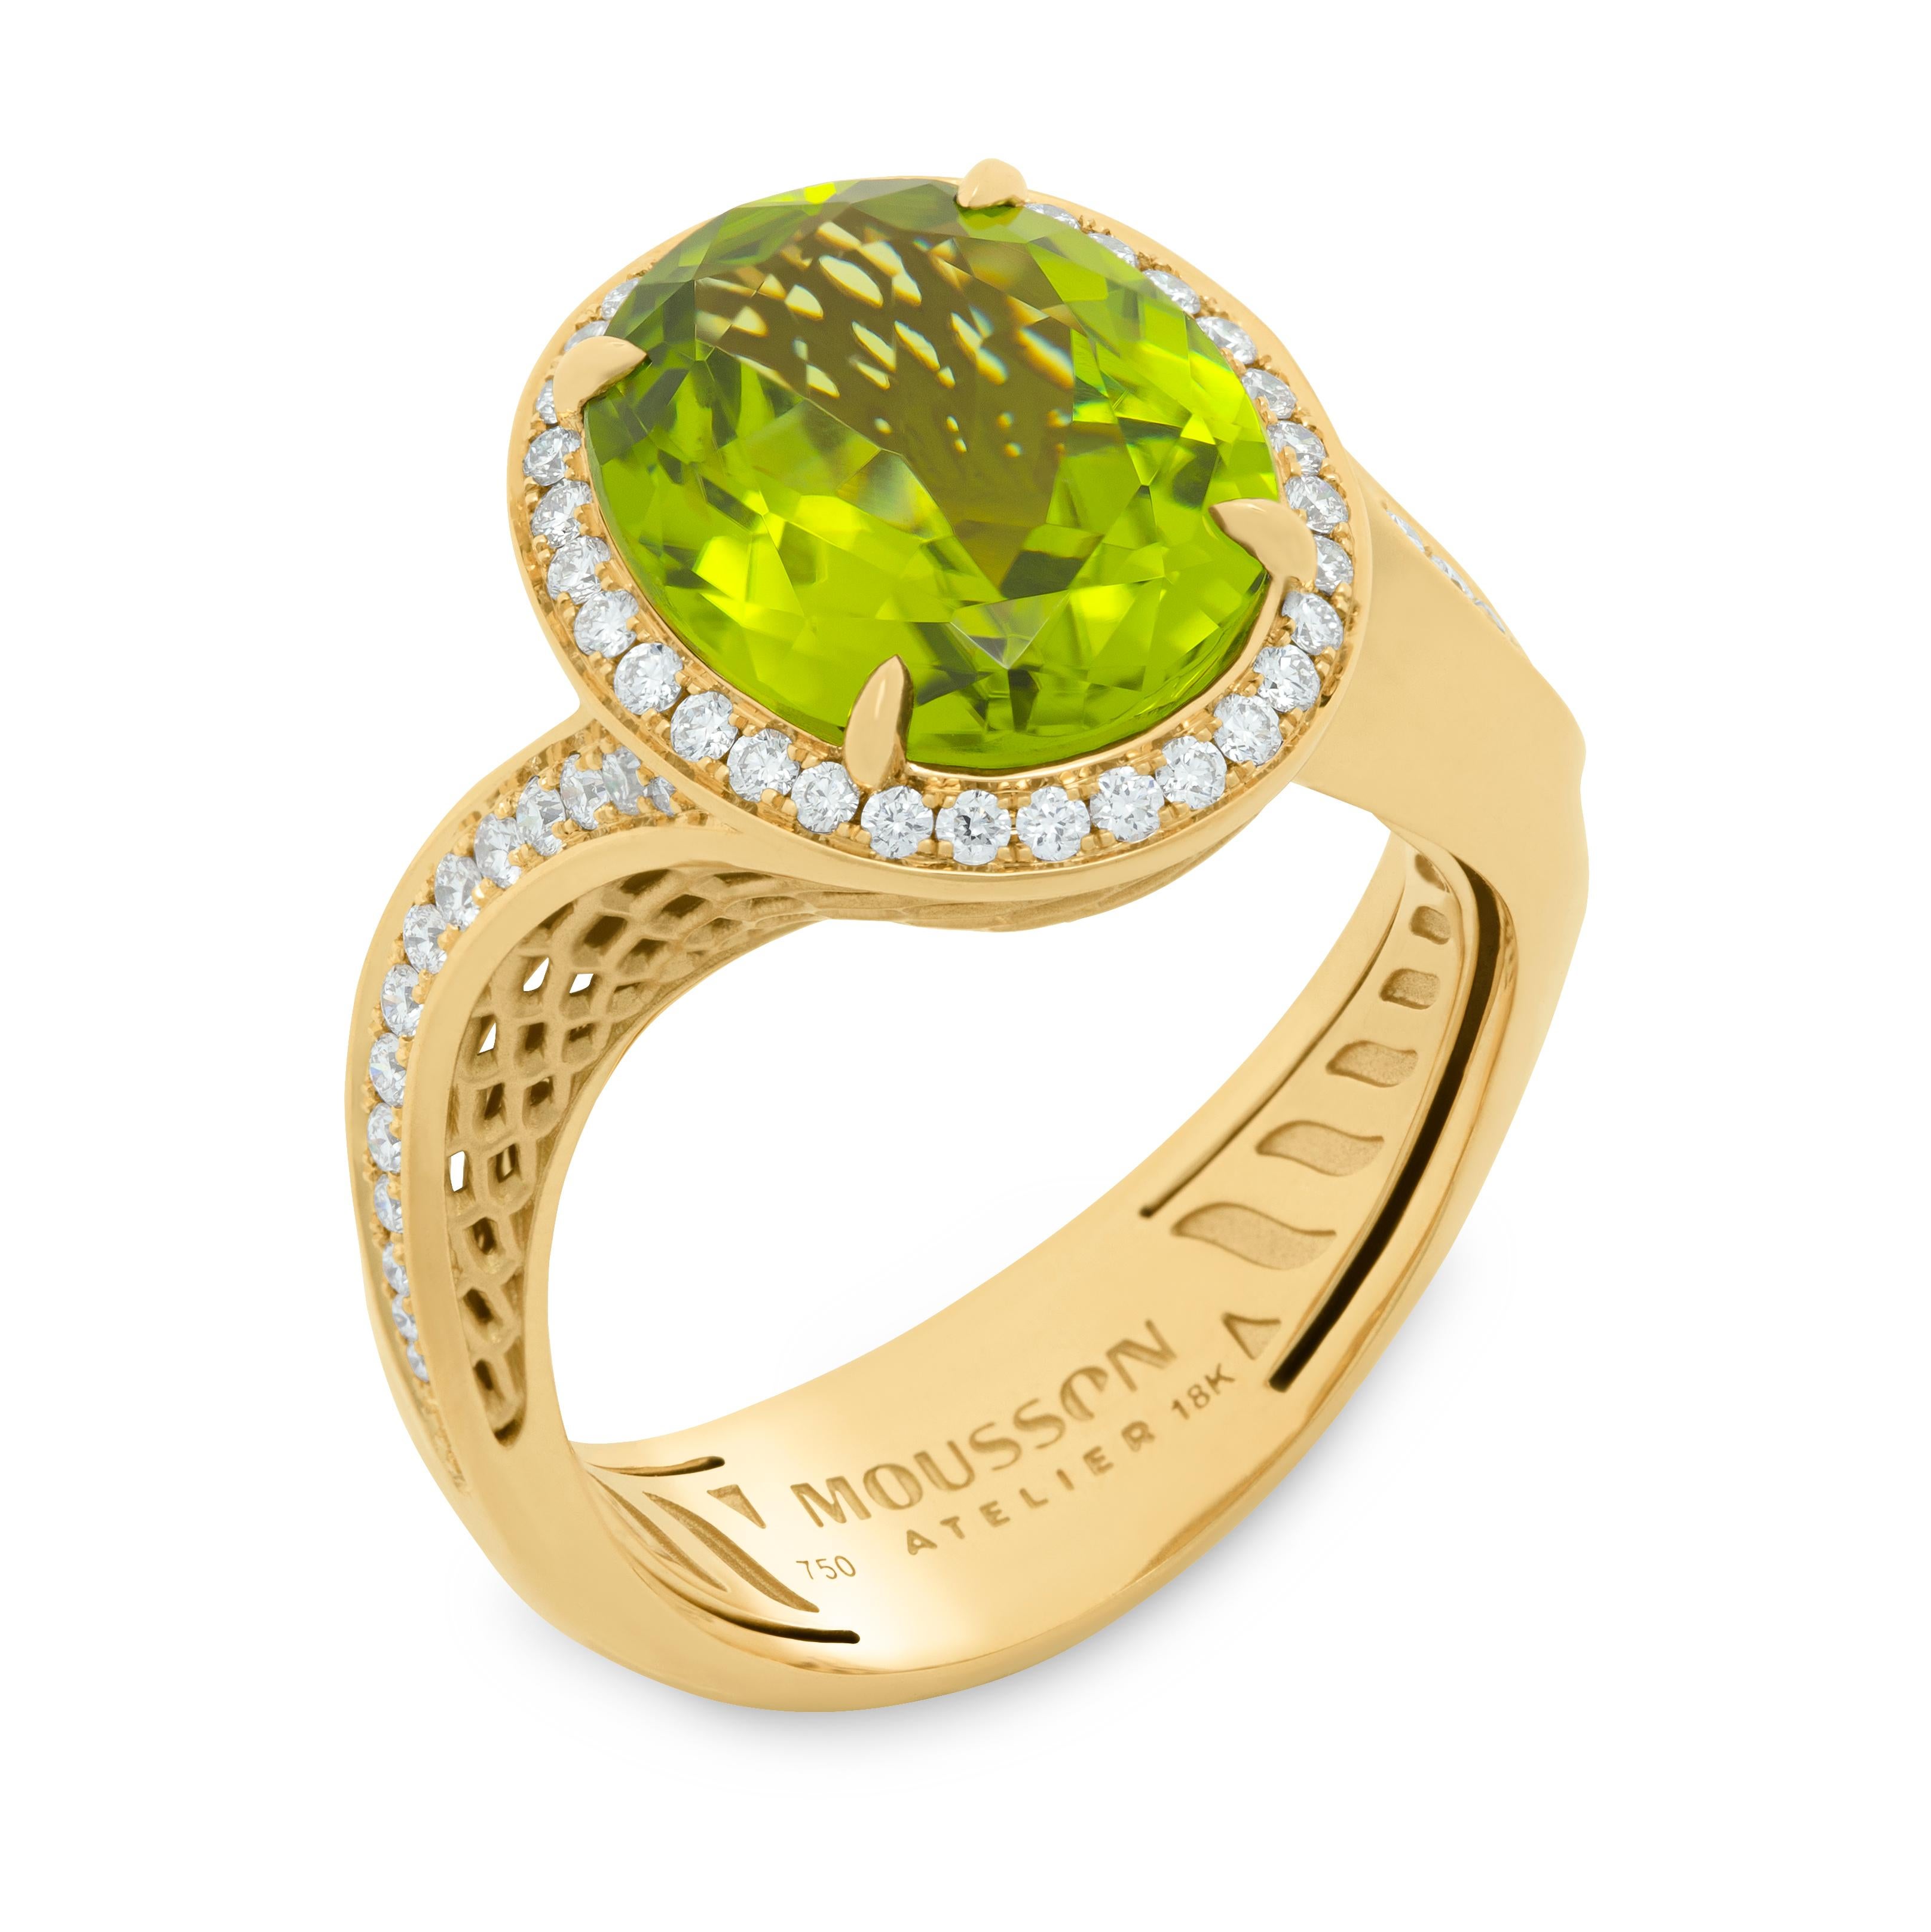 Peridots Diamonds 18 Karat Yellow Gold New Classic Suite
We have published a series of new Rings and Earrings with the same idea but with different details. Introducing a Suite crafted from 18 Karat Yellow Gold, which in company with Peridots and